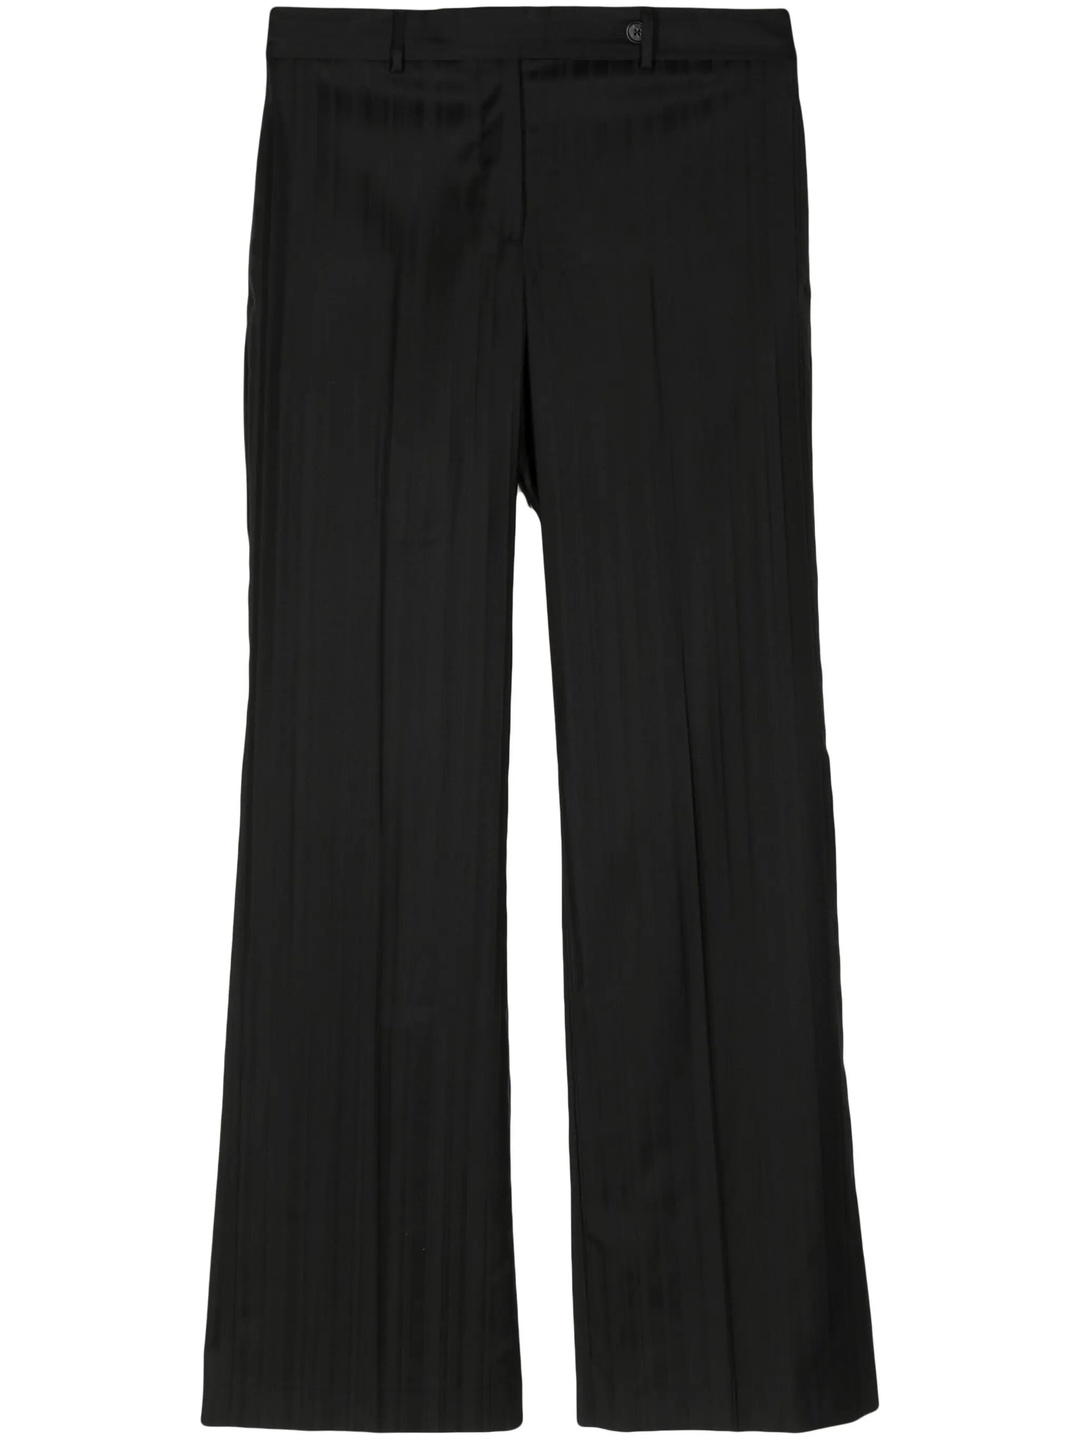 Womens Trousers - 1